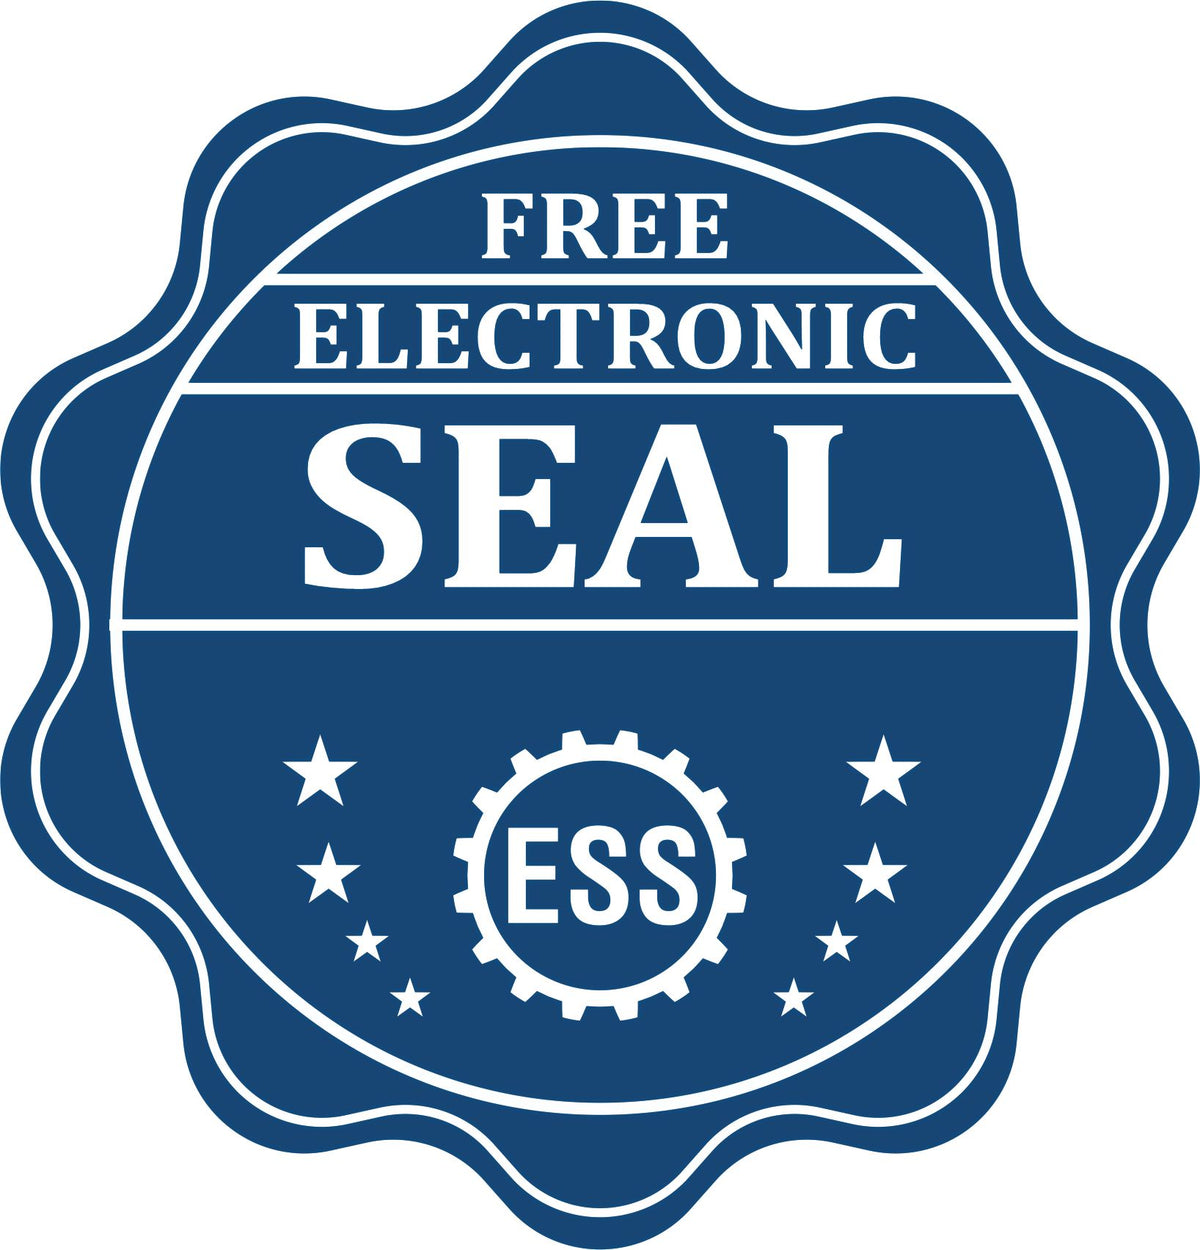 A badge showing a free electronic seal for the Handheld Florida Architect Seal Embosser with stars and the ESS gear on the emblem.